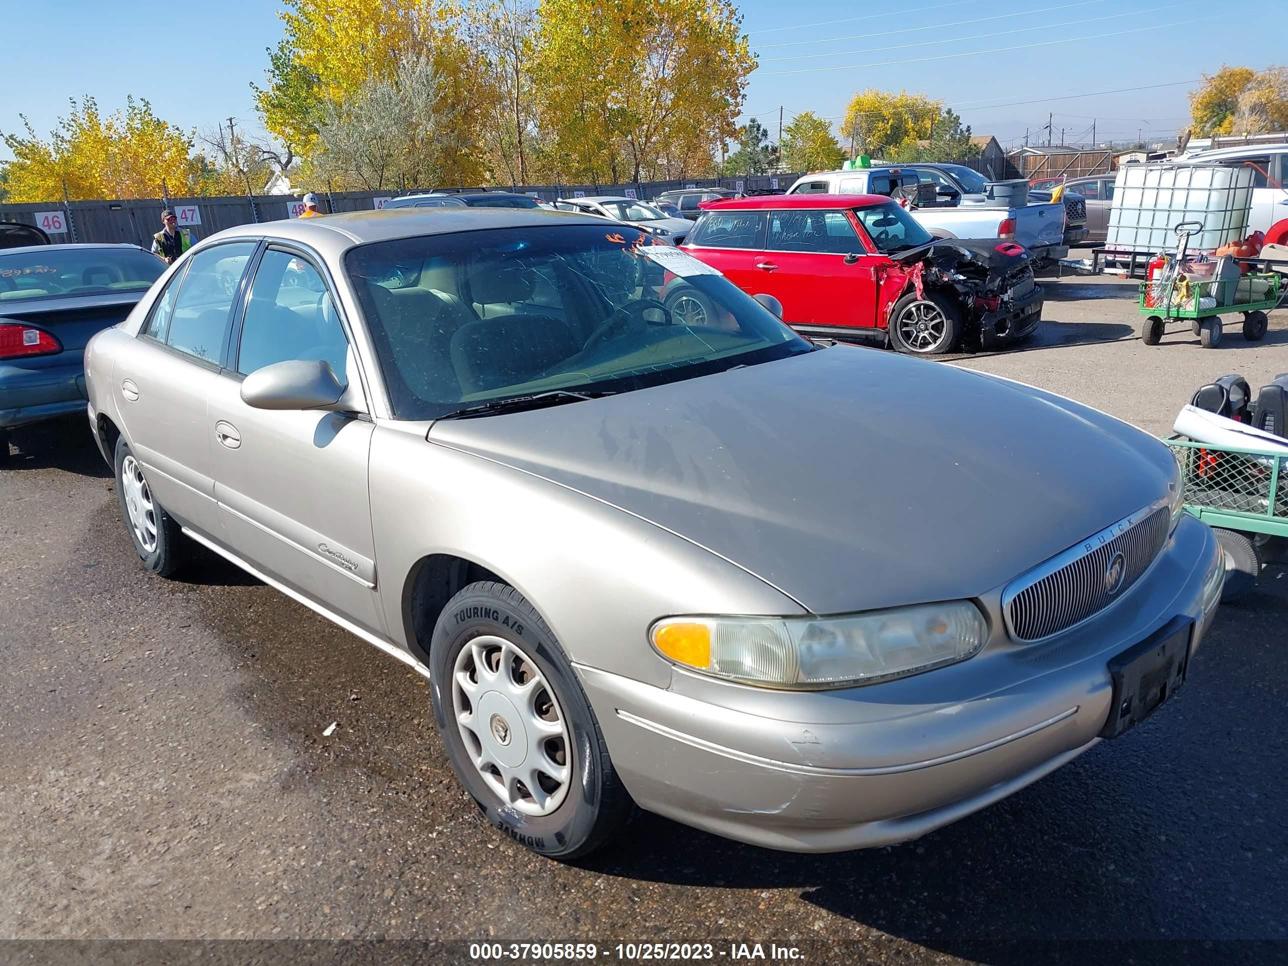 vin: 2G4WS52JX21111827 2G4WS52JX21111827 2002 buick century 3100 for Sale in 80022, 8510 Brighton Rd., Commerce City, Colorado, USA